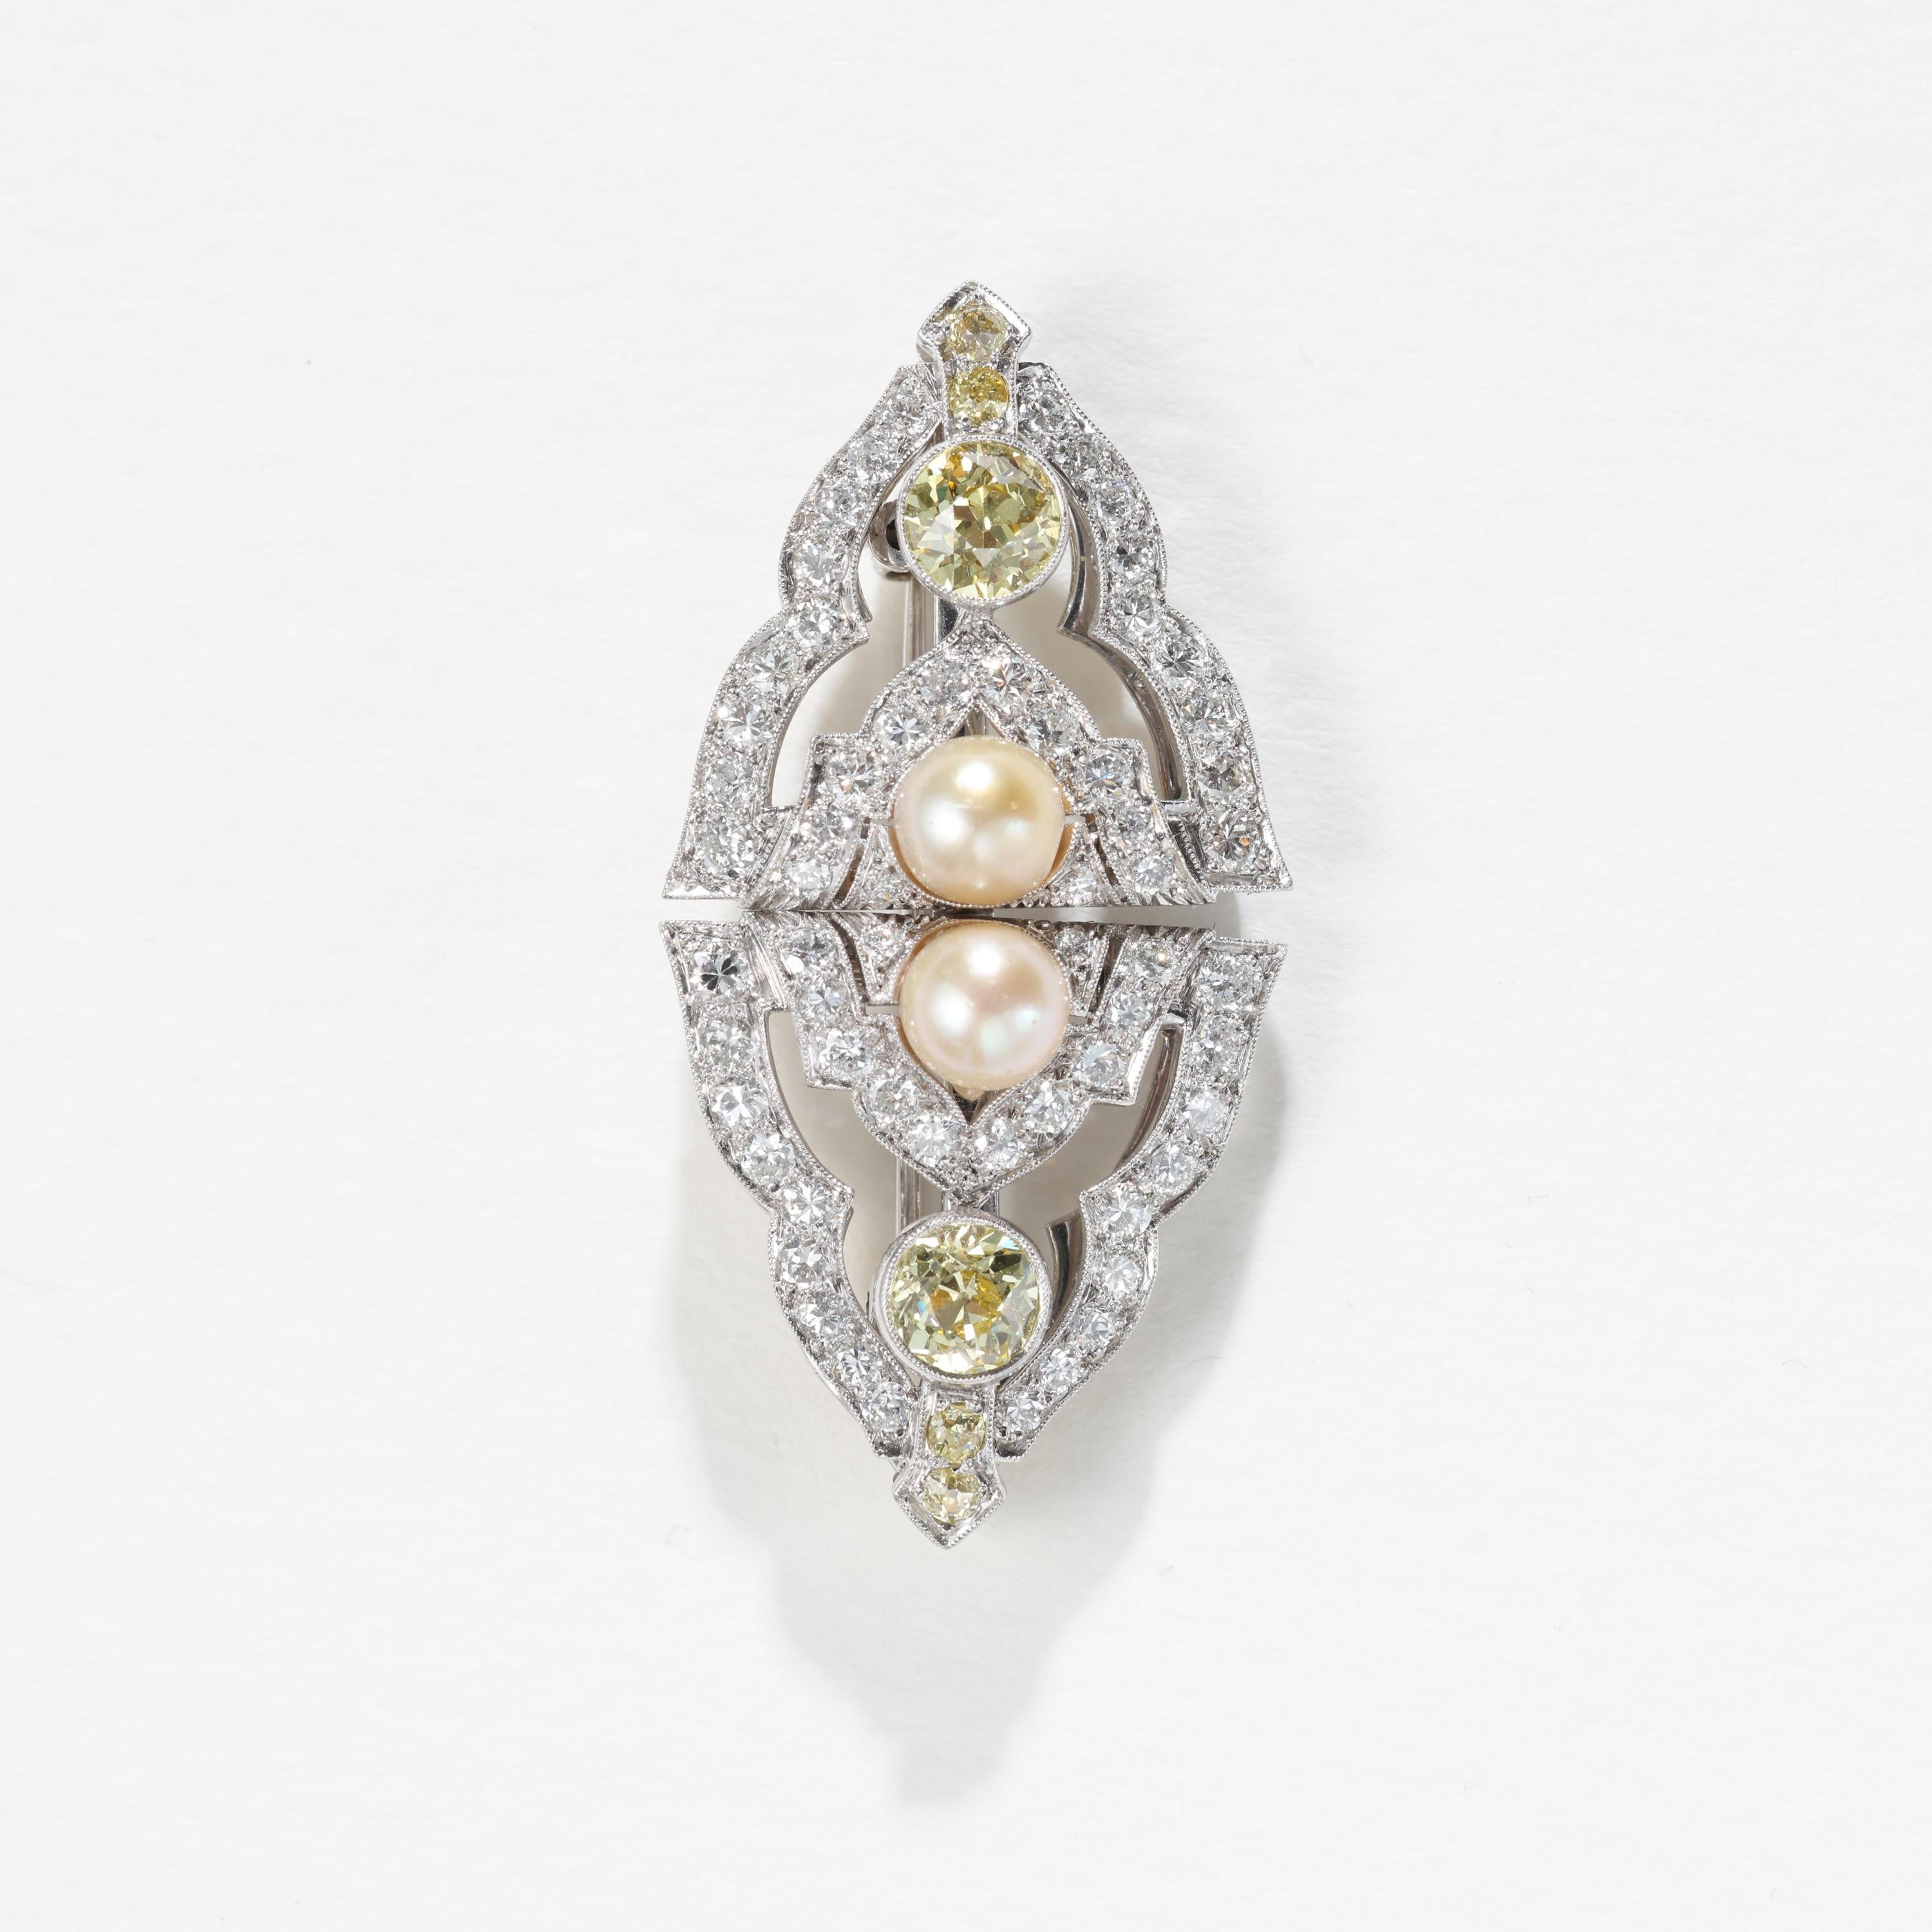 Old Mine Cut Dog Collar, Brooch: Art Deco Yellow Diamonds & Natural Pearls, Platinum, GIA For Sale